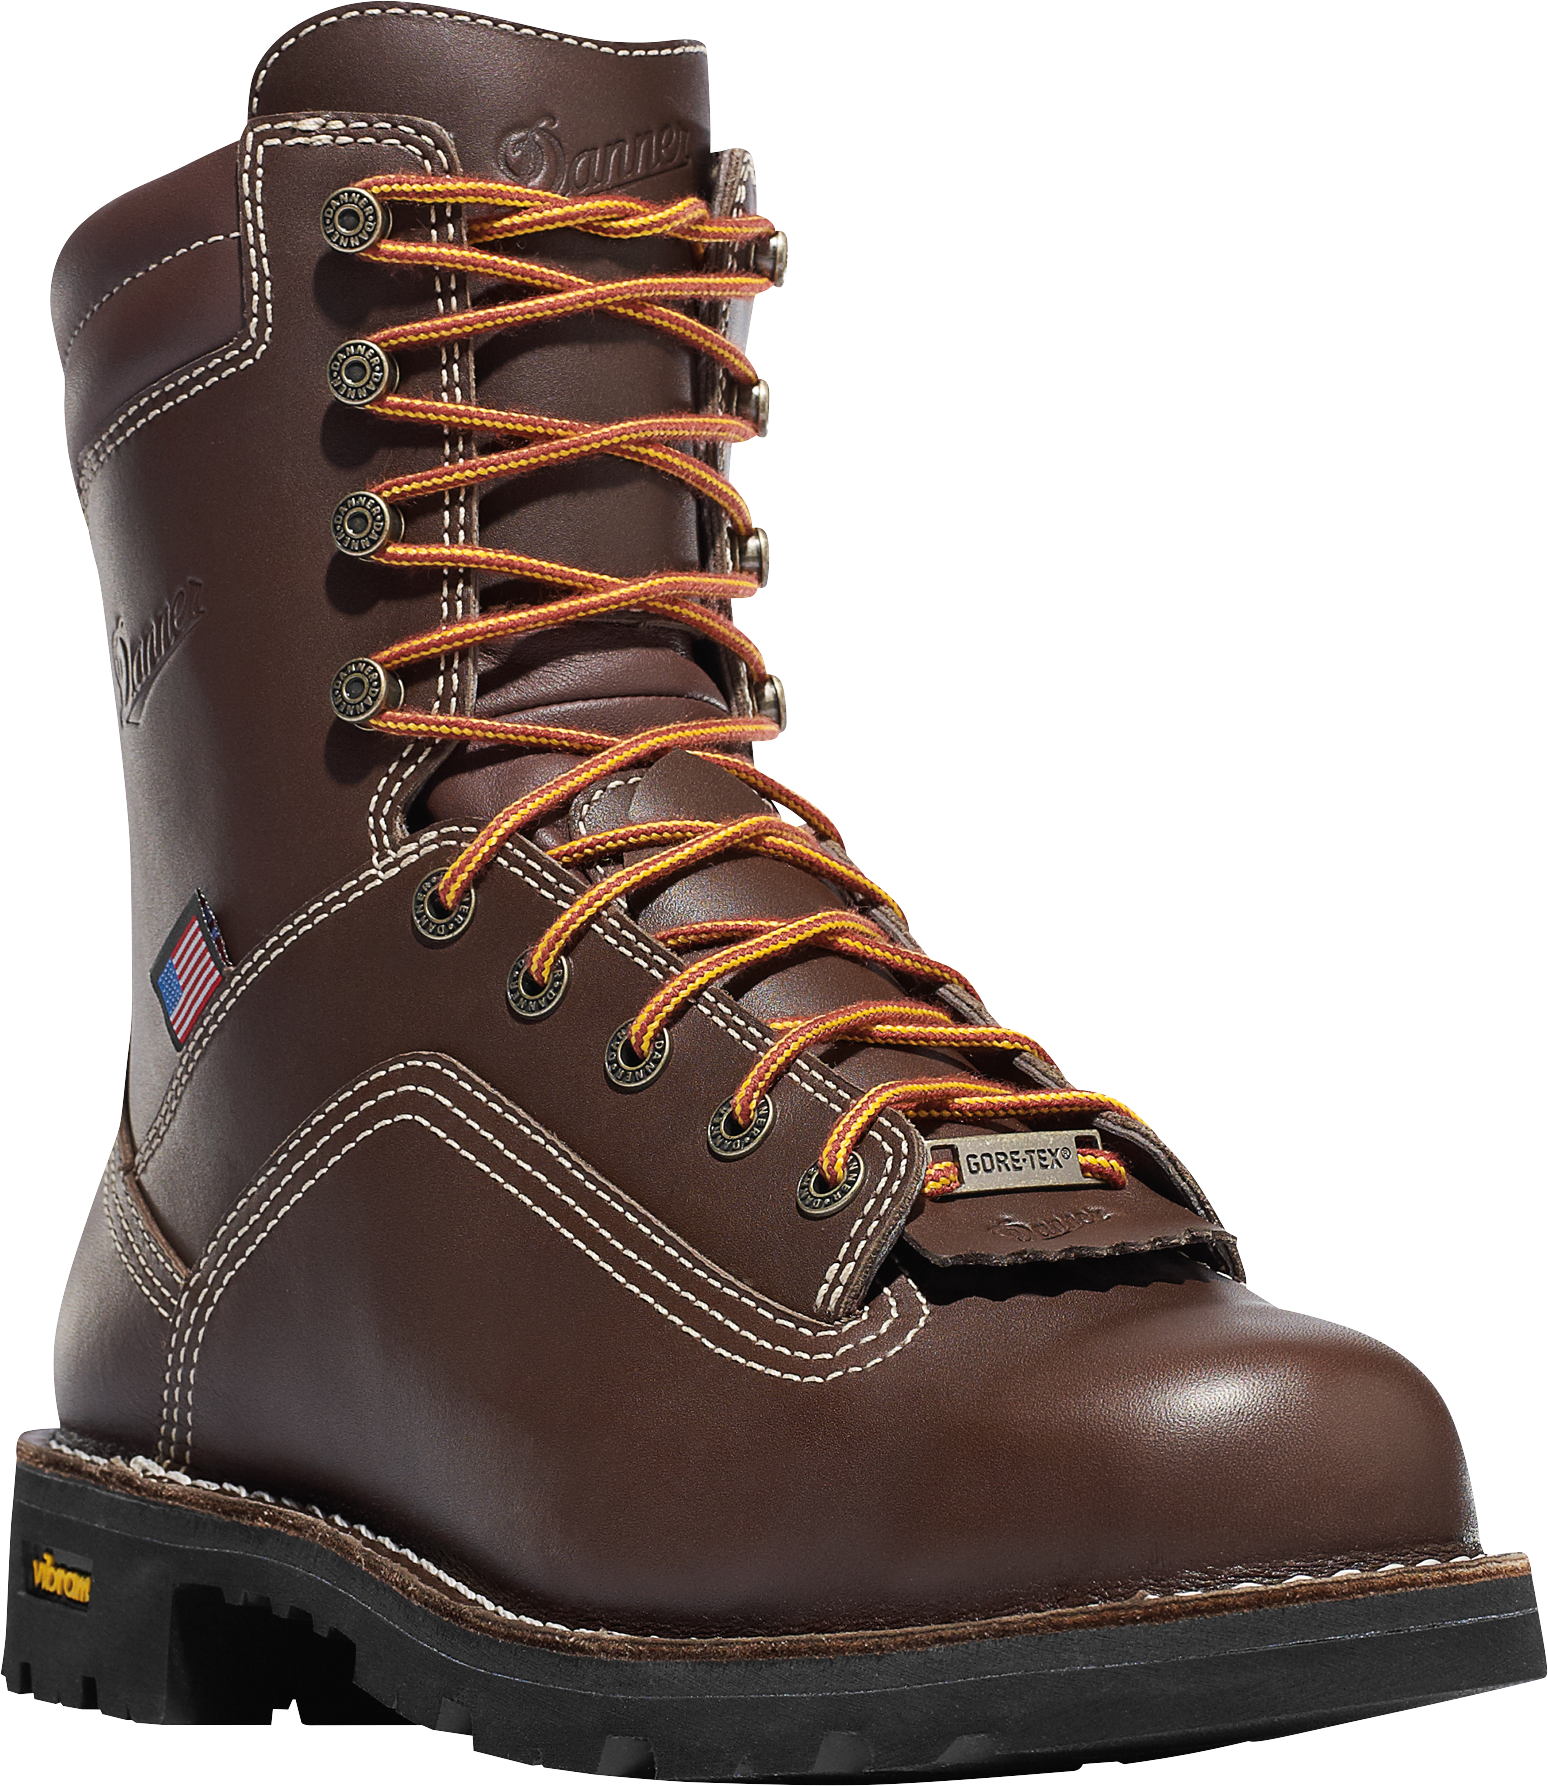 Danner Quarry USA Brown GORE-TEX Alloy Toe Work Boots for Men - Brown - 13W